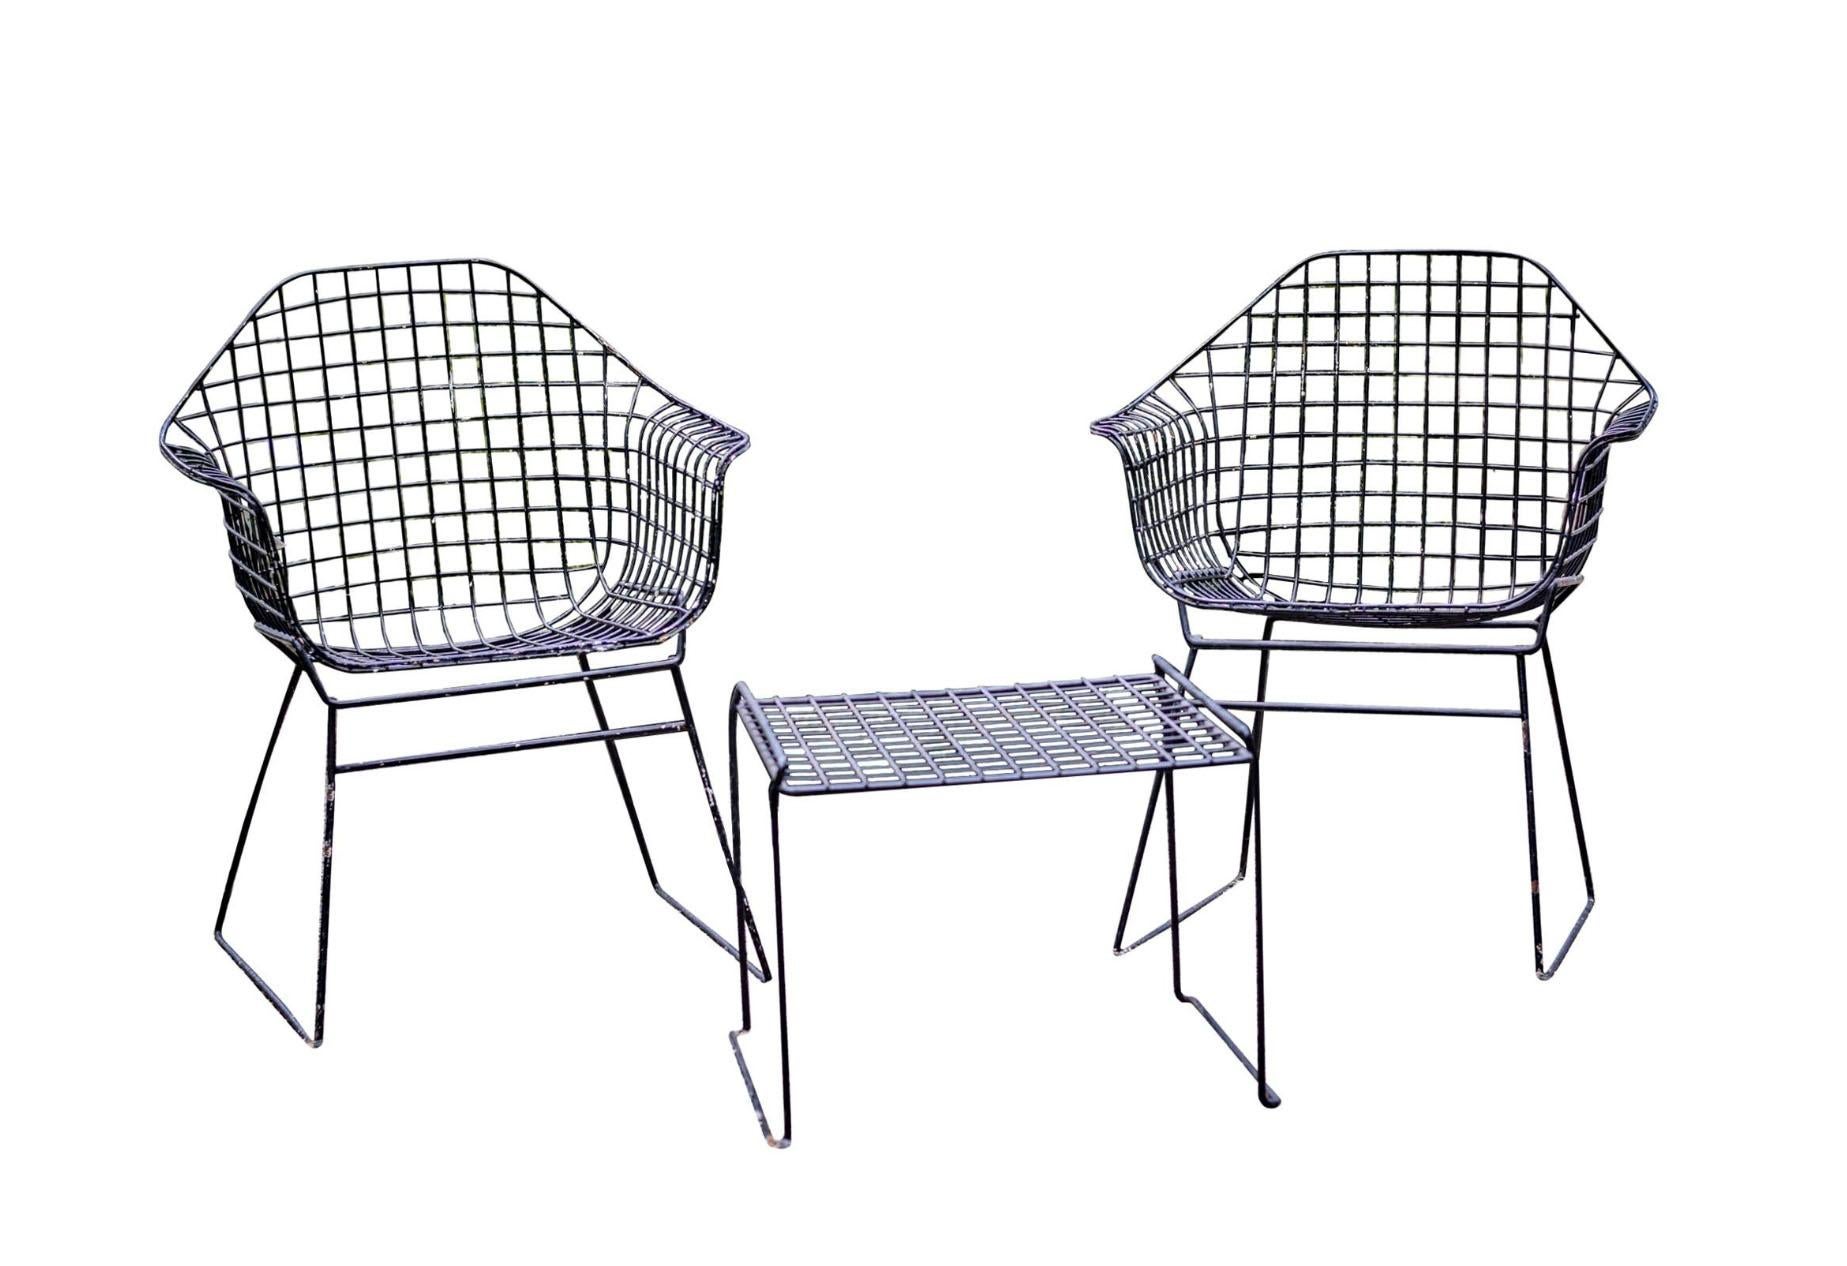 Knoll historian Brian Lutz once said “Bertoia’s paintings were better than his sculptures. And his sculptures were better than his furniture. And his furniture was absolutely brilliant.”
This original table and chair set is a fabulous find from the